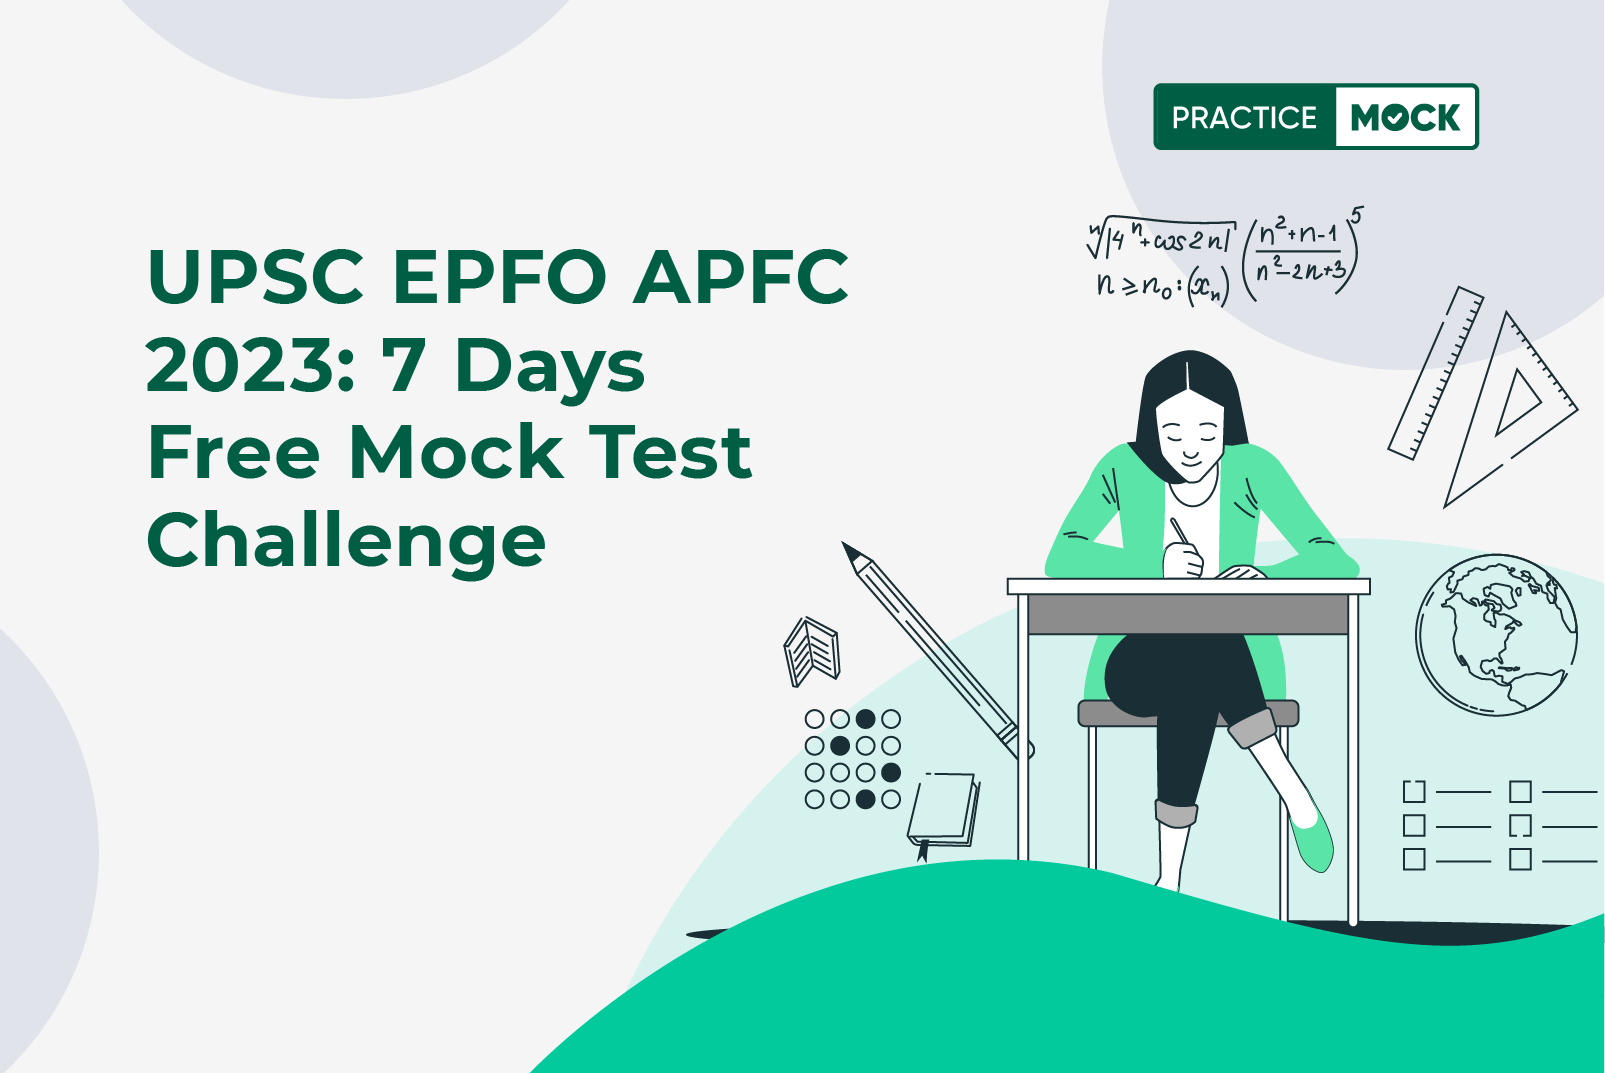 UPSC EPFO APFC 2023: Special Free Mock Test Challenge for 2nd July 2023